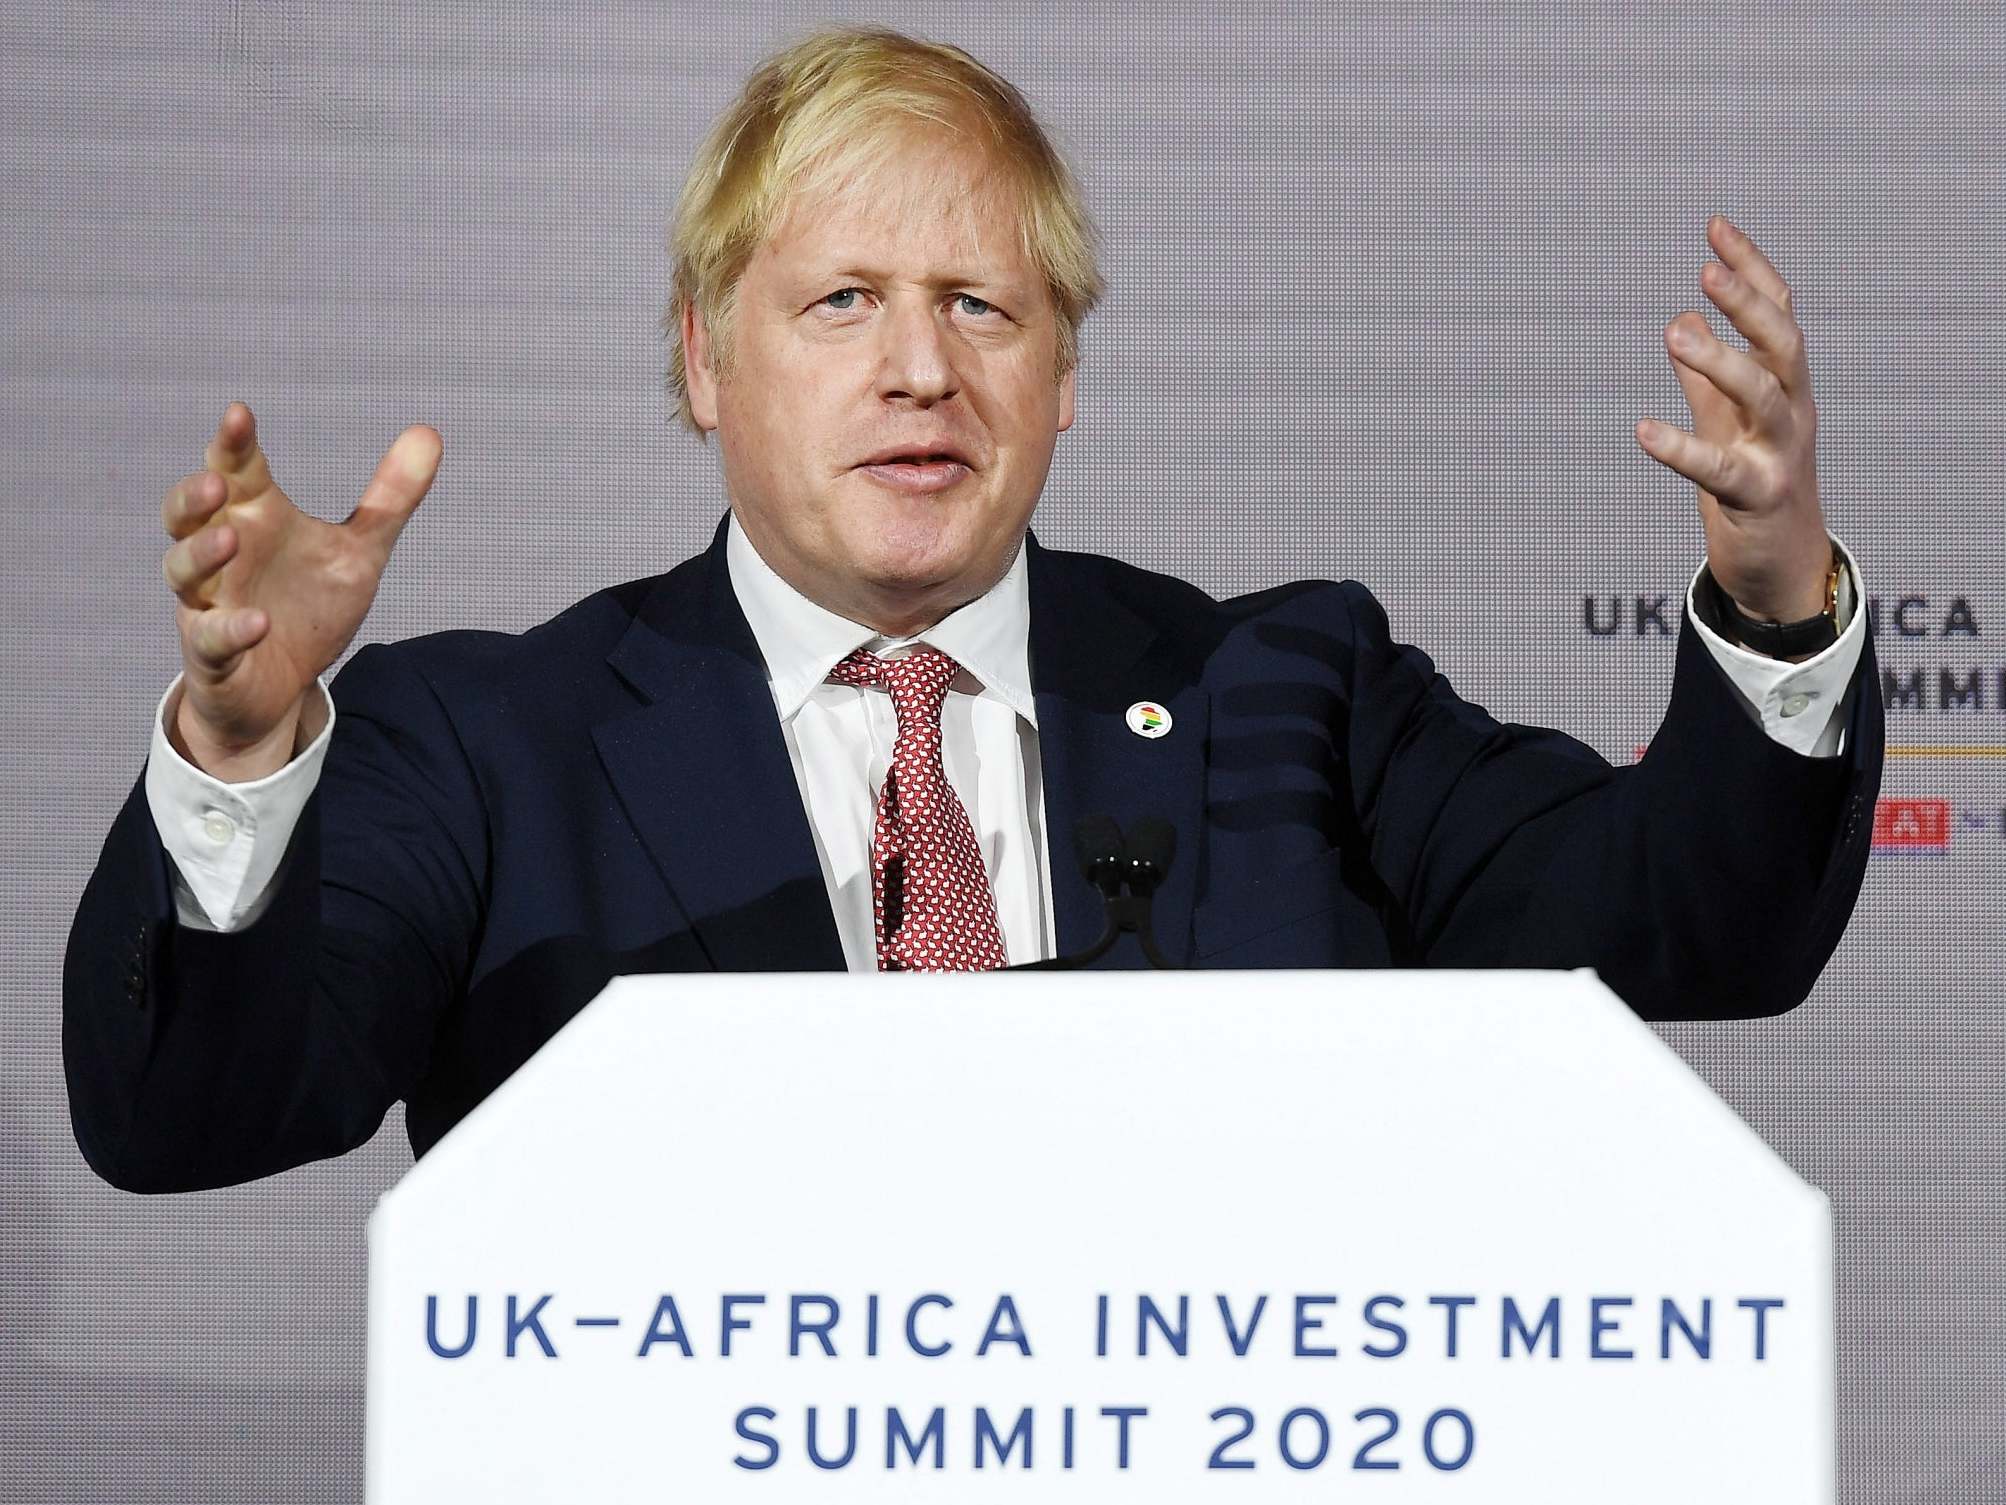 Johnson made the announcement at a recent summit in London